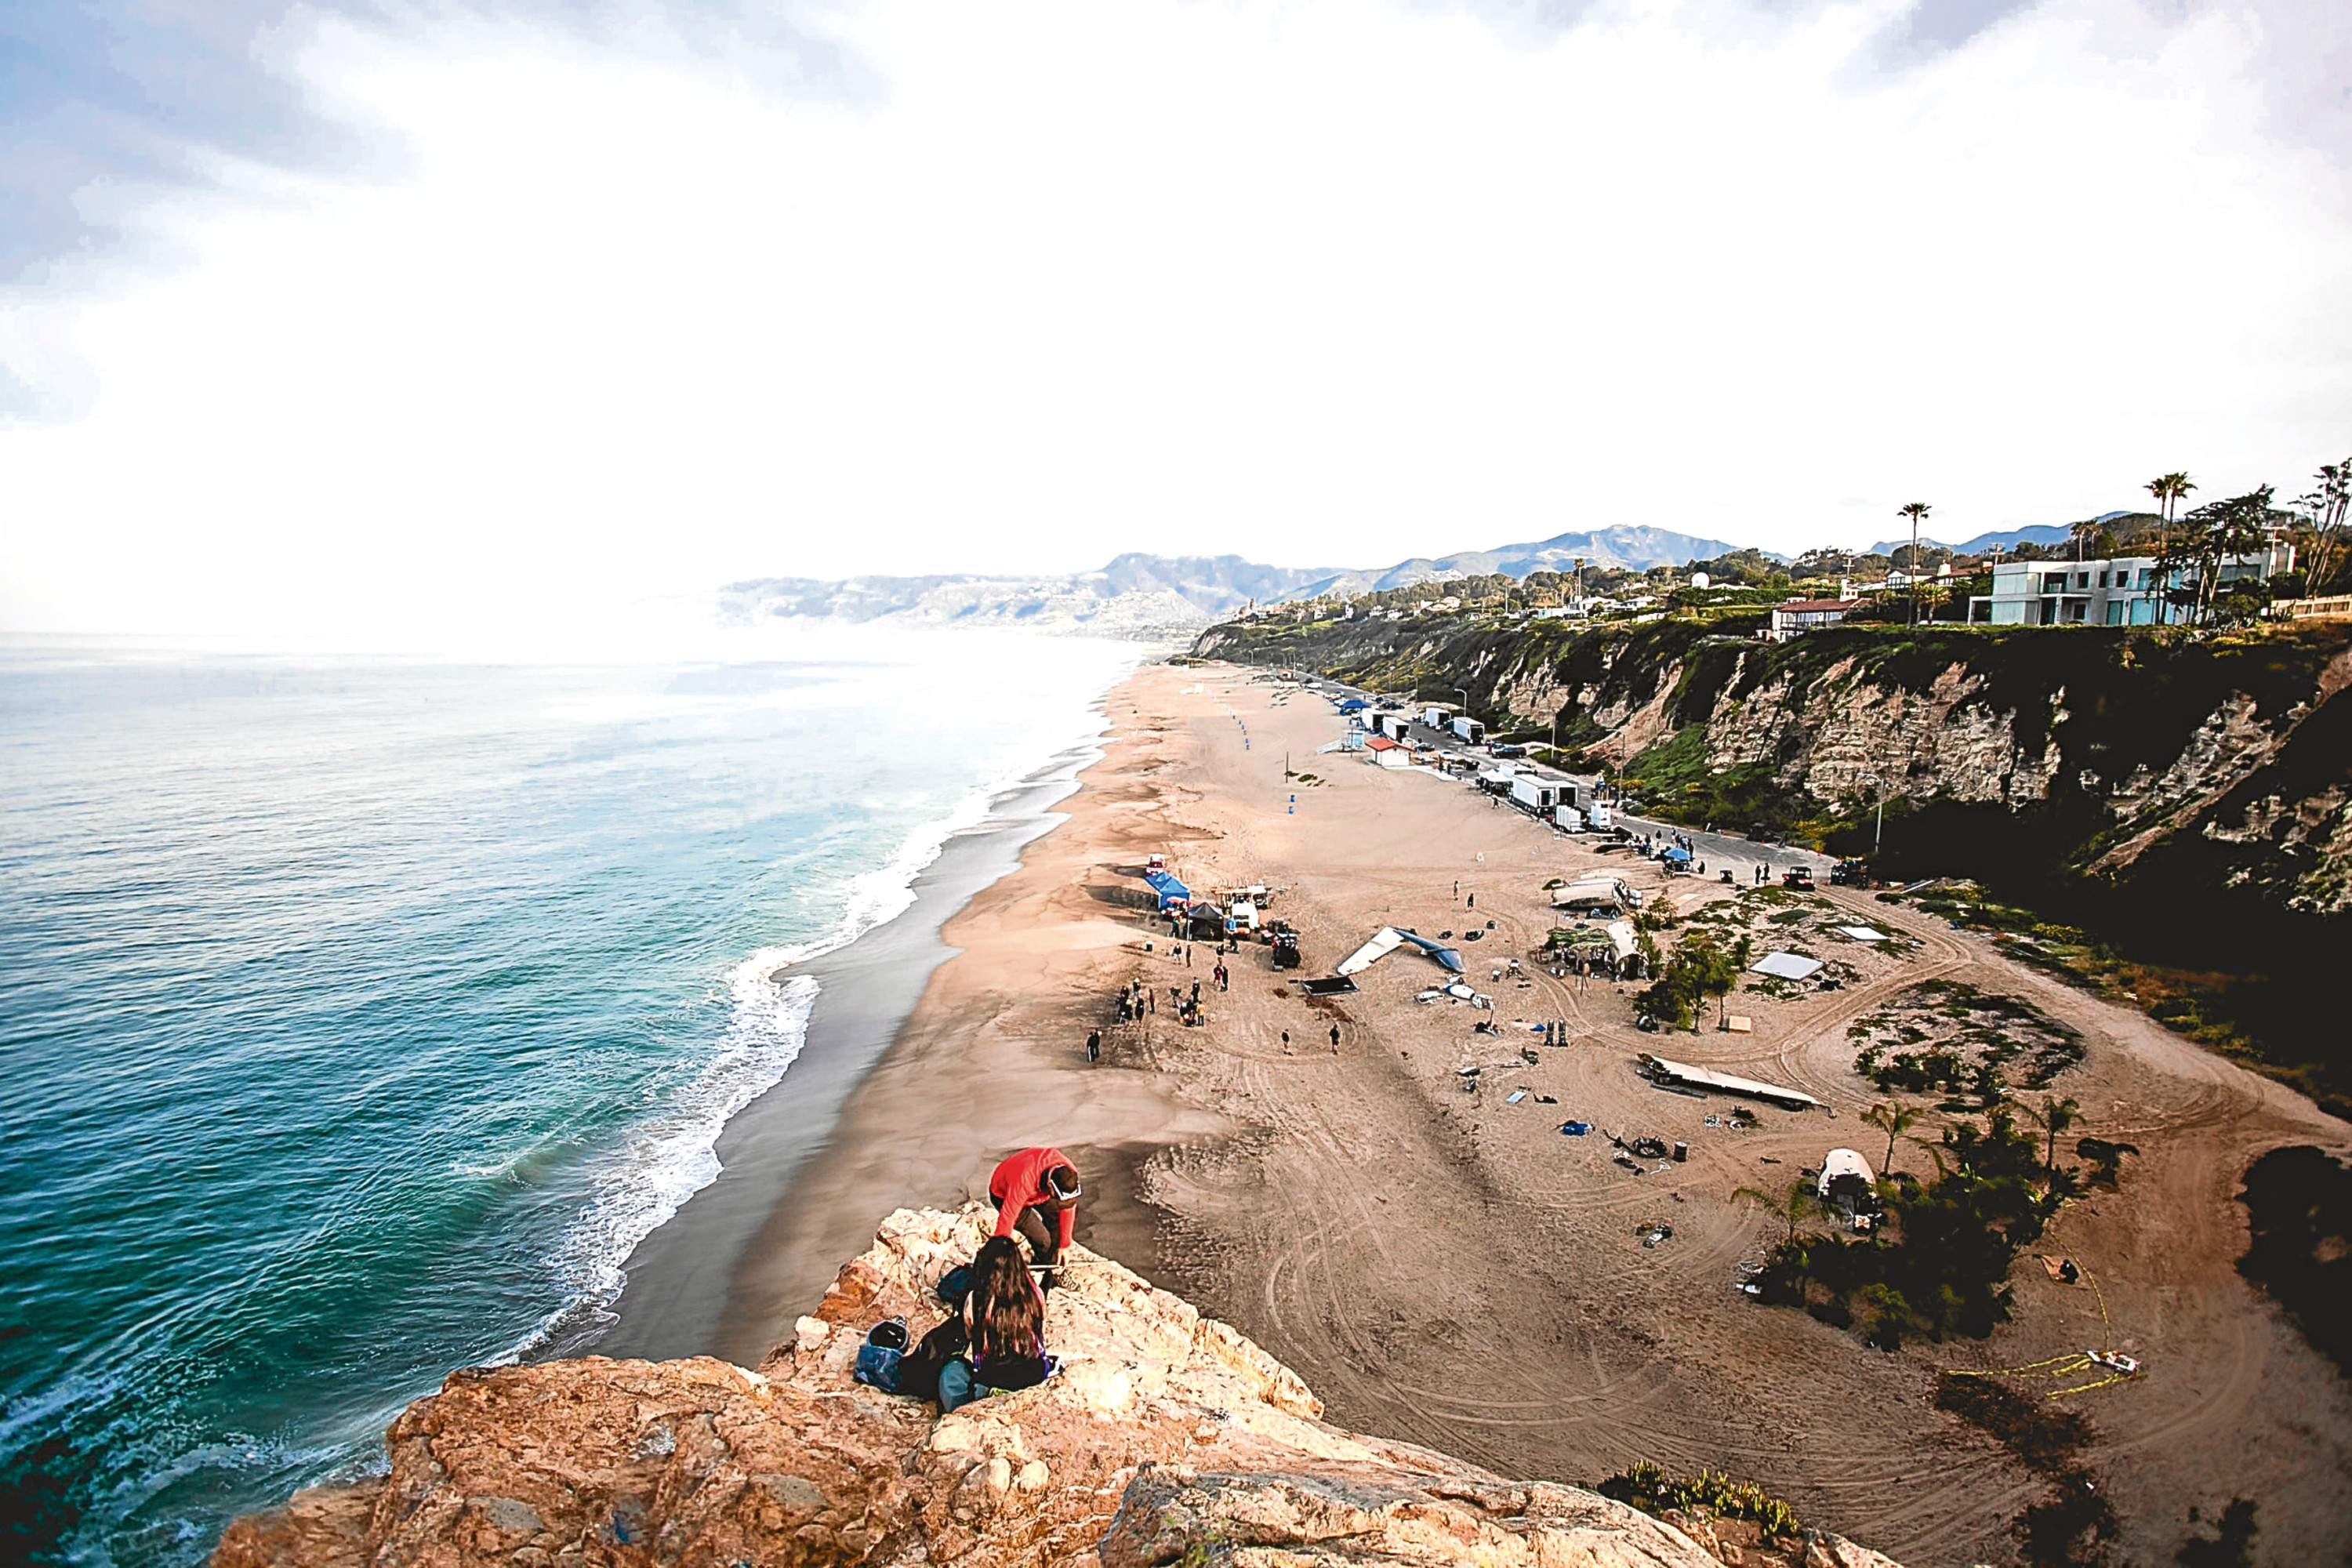 The stunning view from Point Dume on Zuma Beach